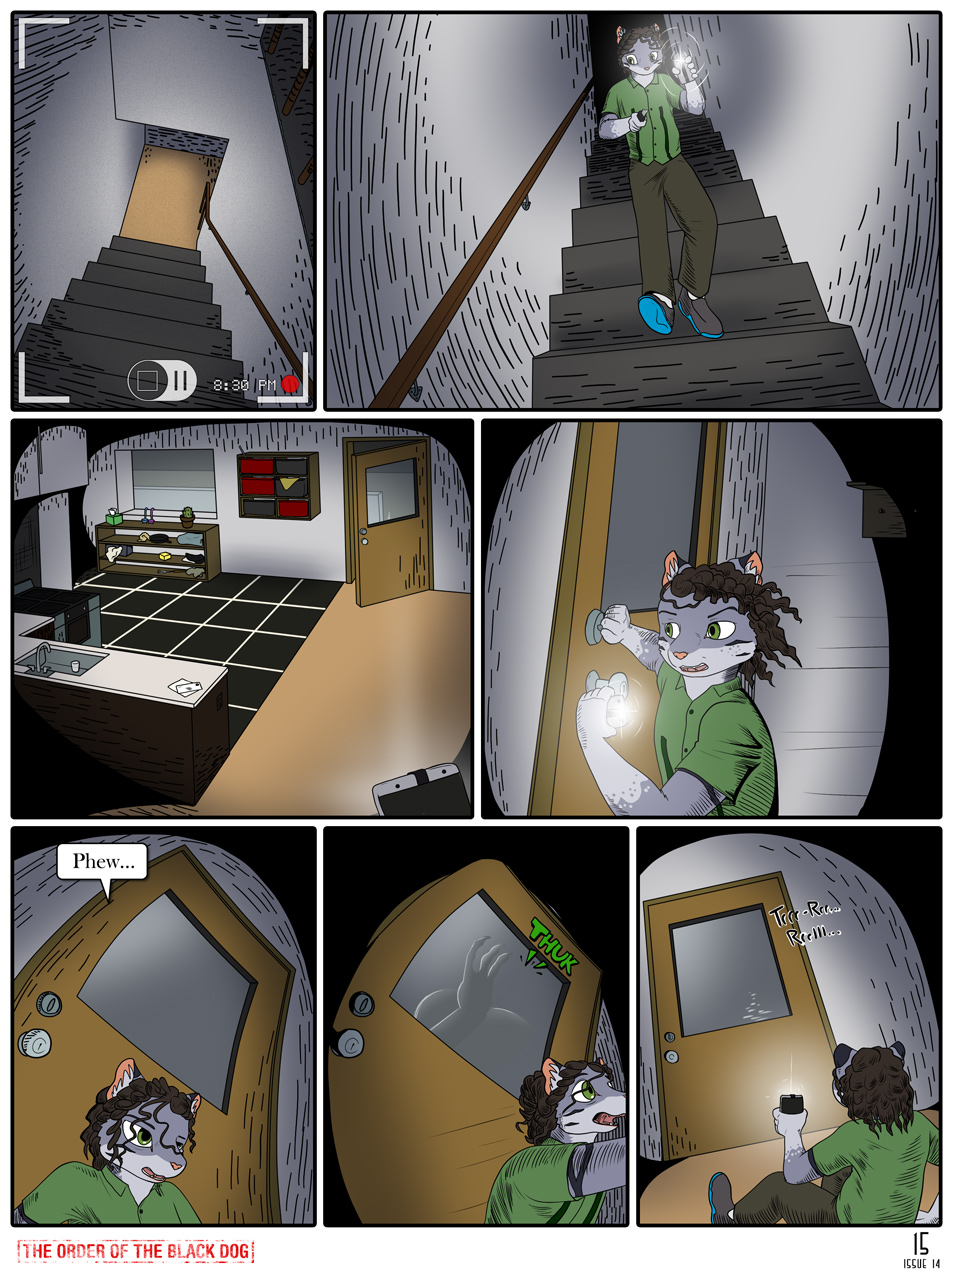 Issue 14, Page 15